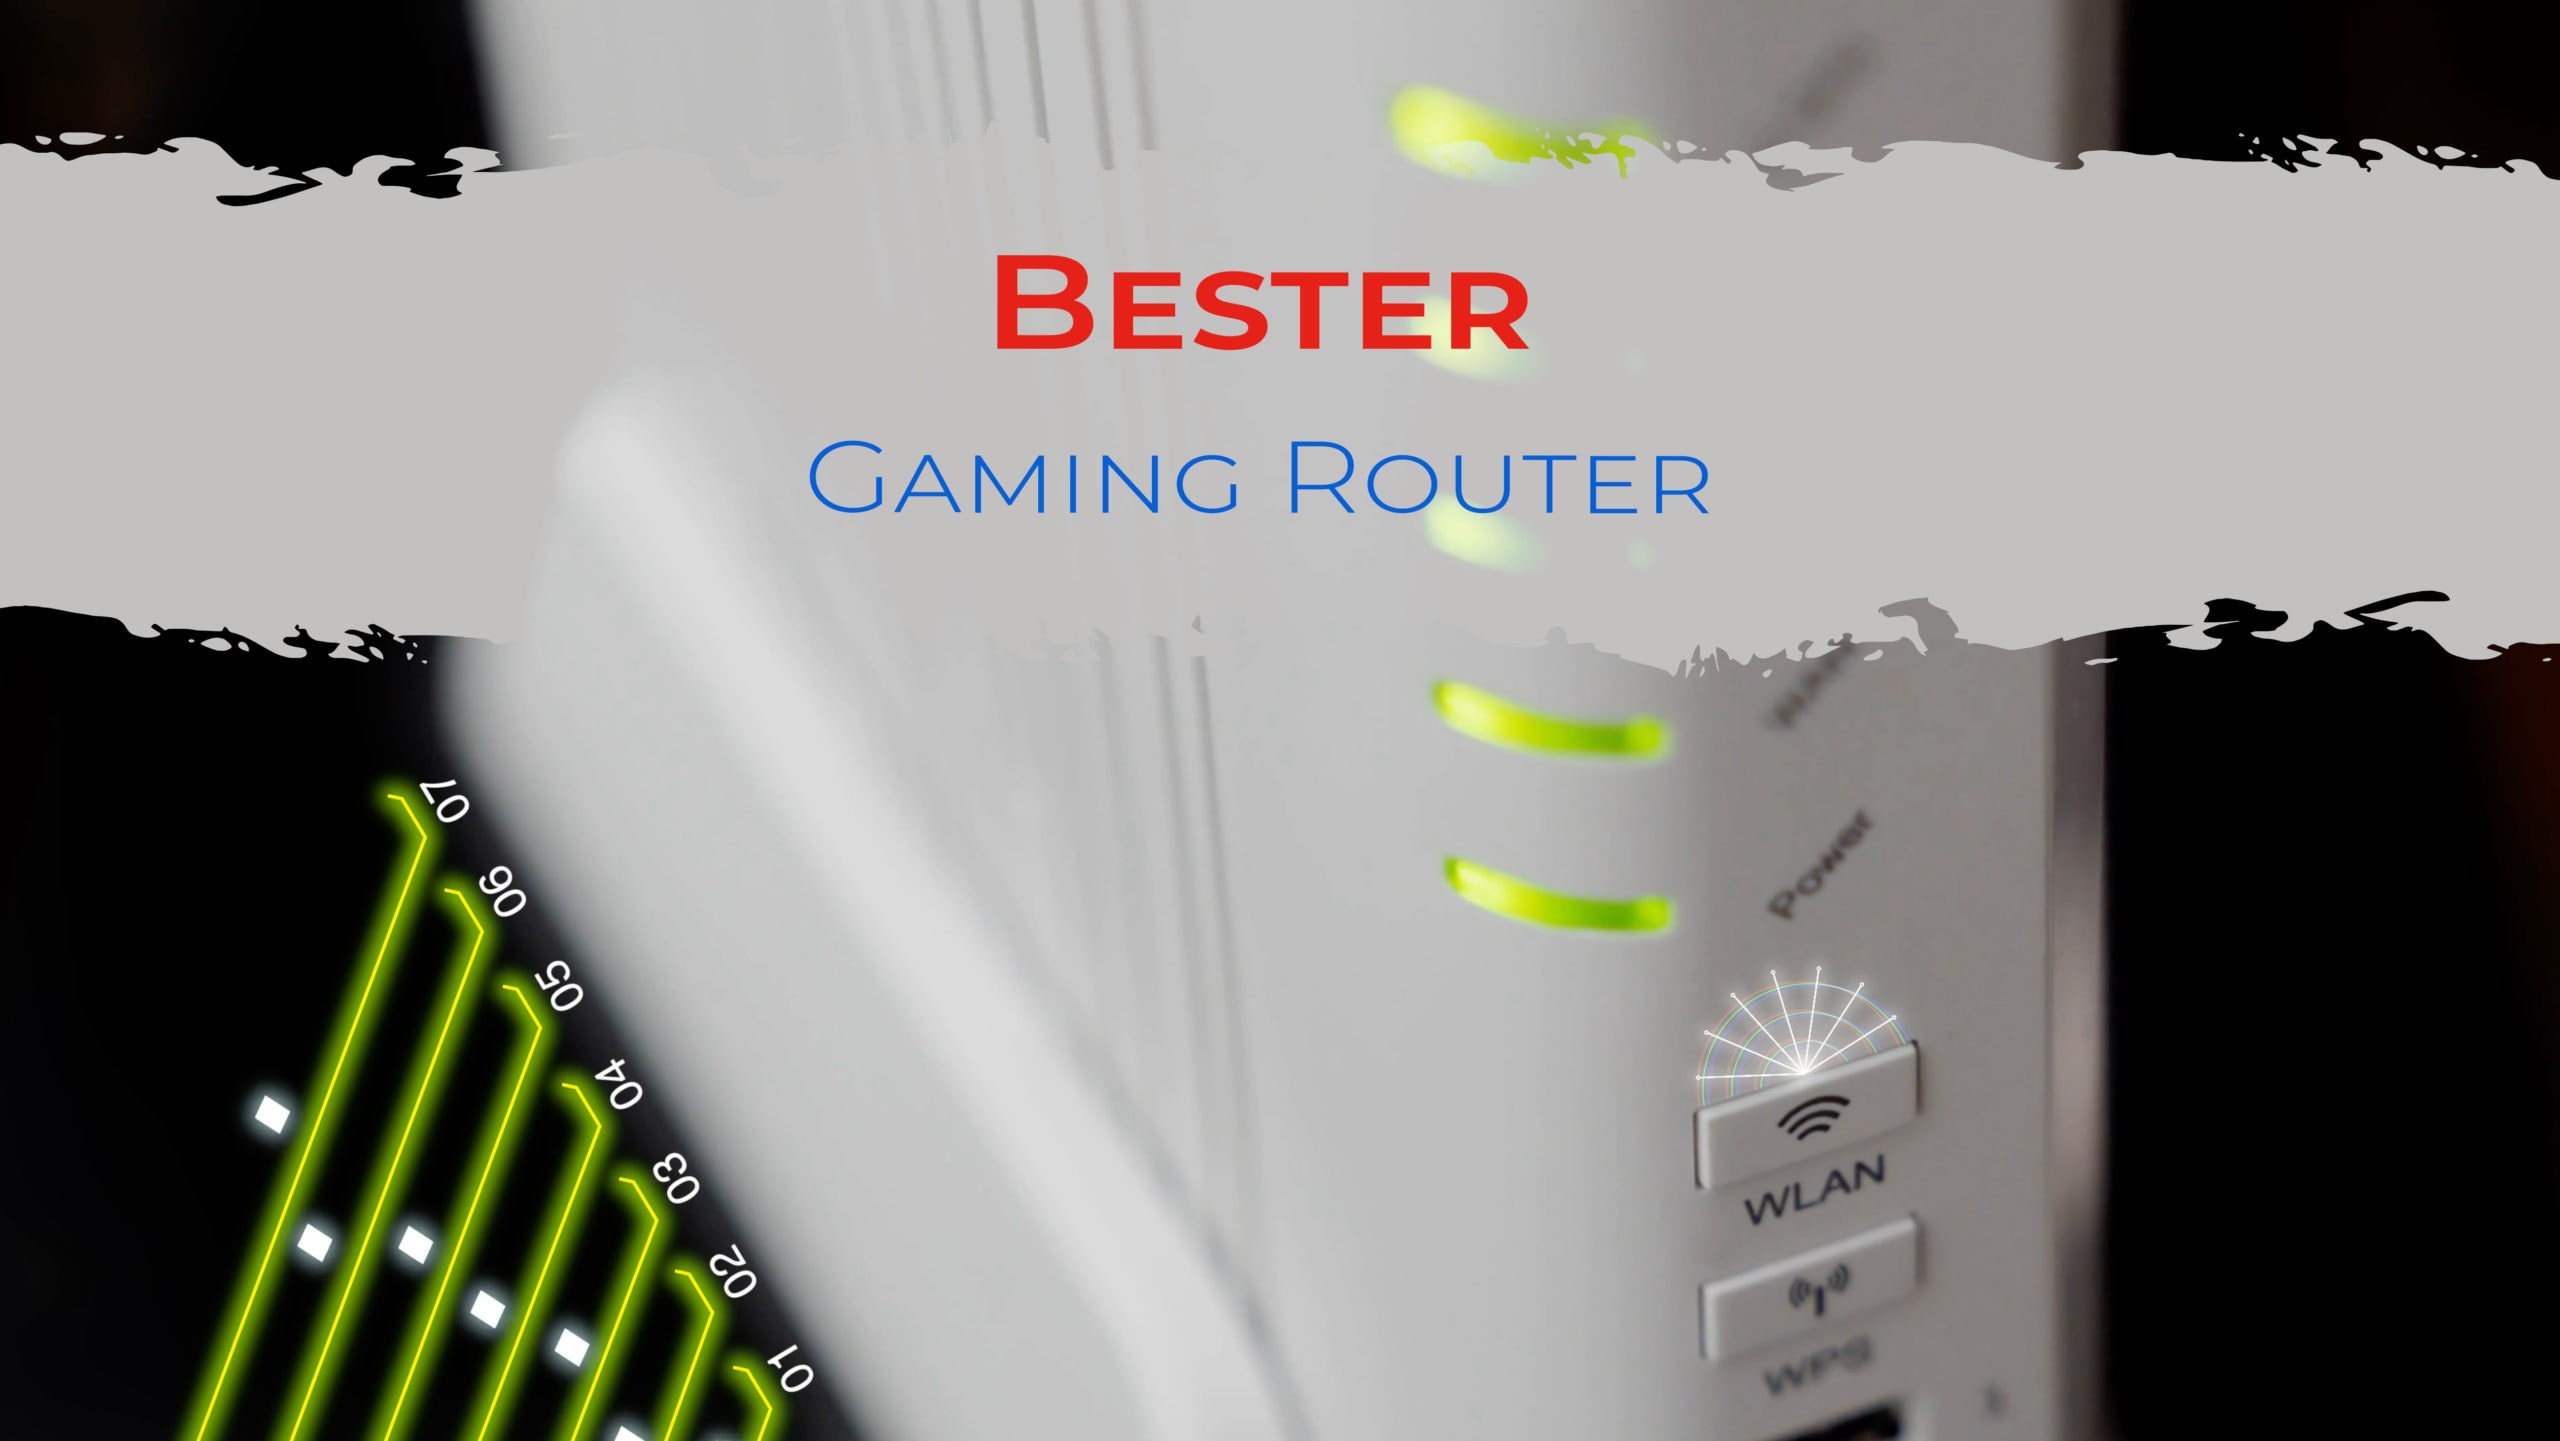 Bester Gaming Router